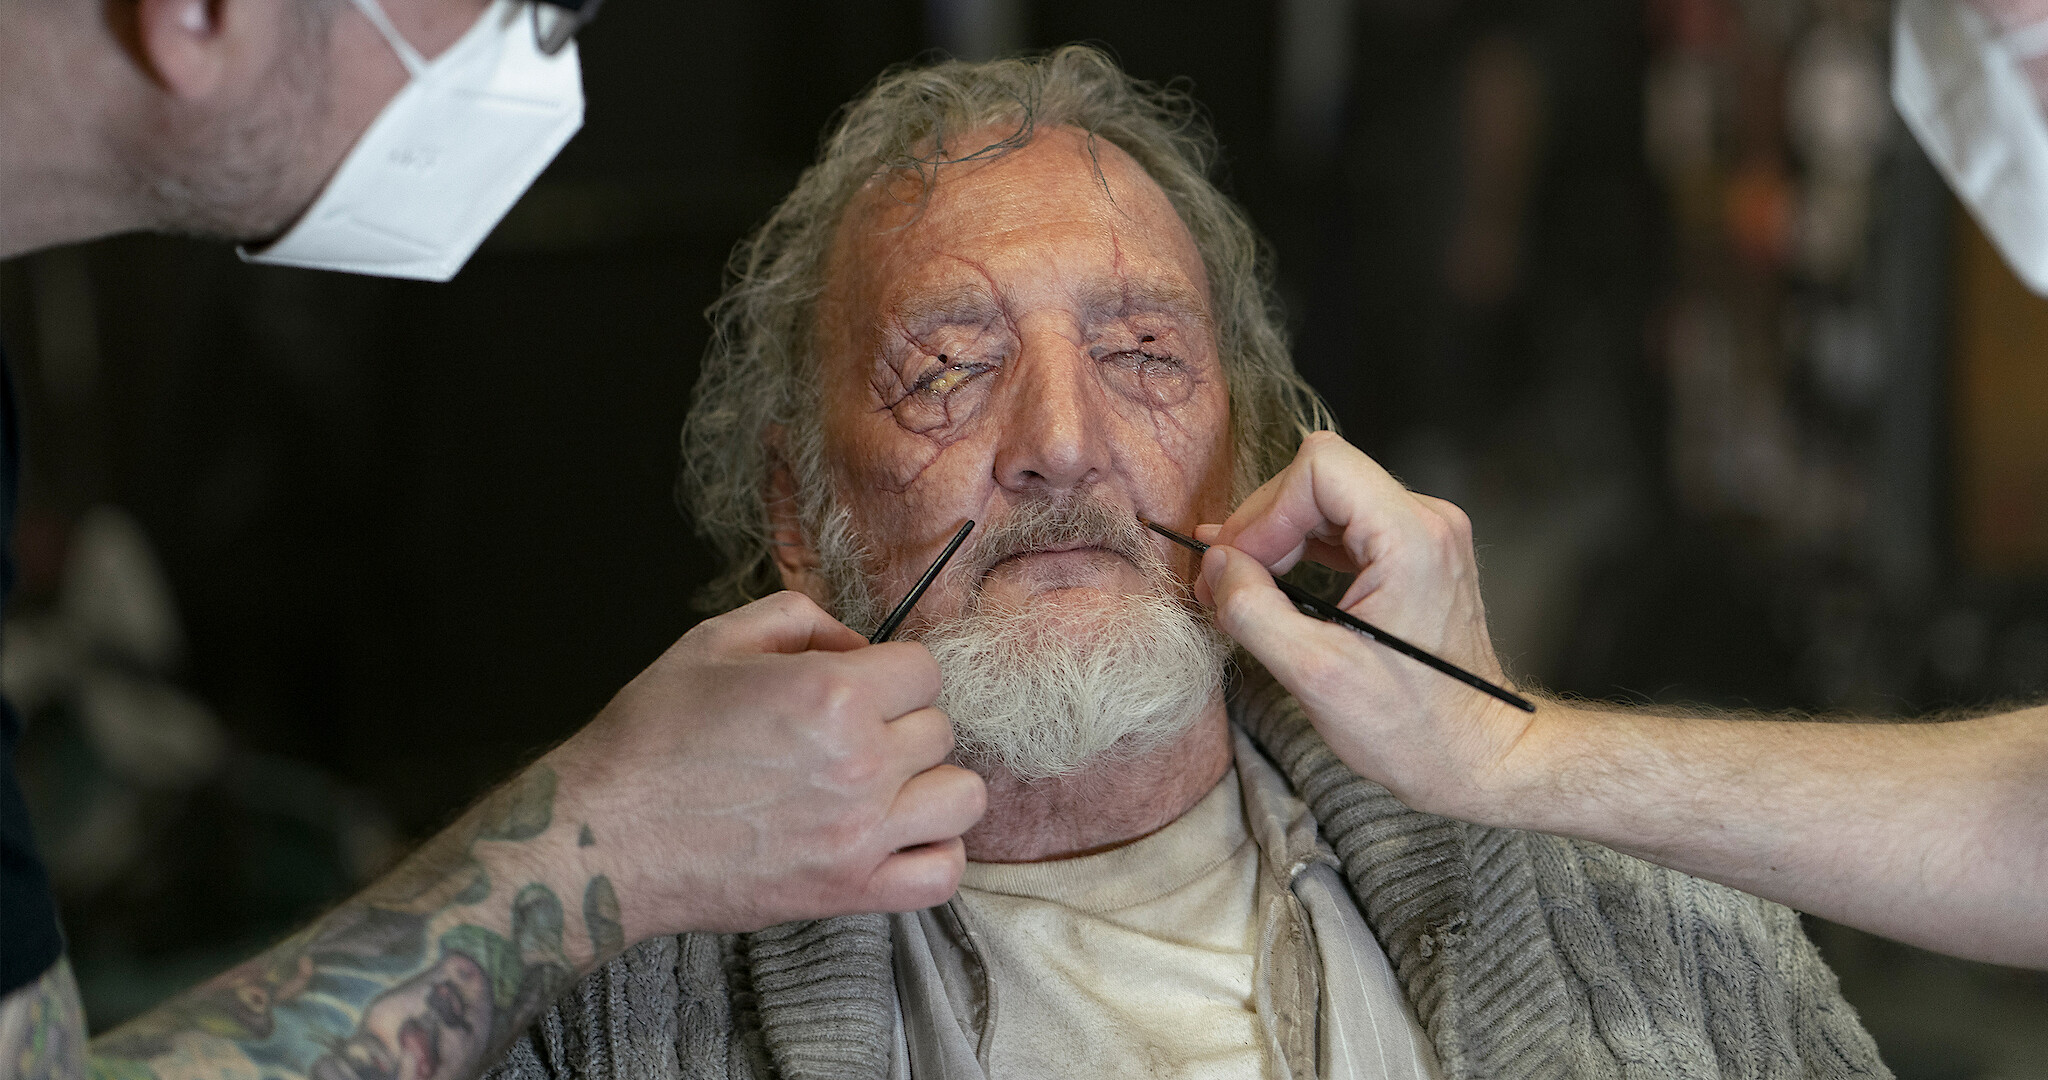 Makeup artist proves she can transform into ANY fictional